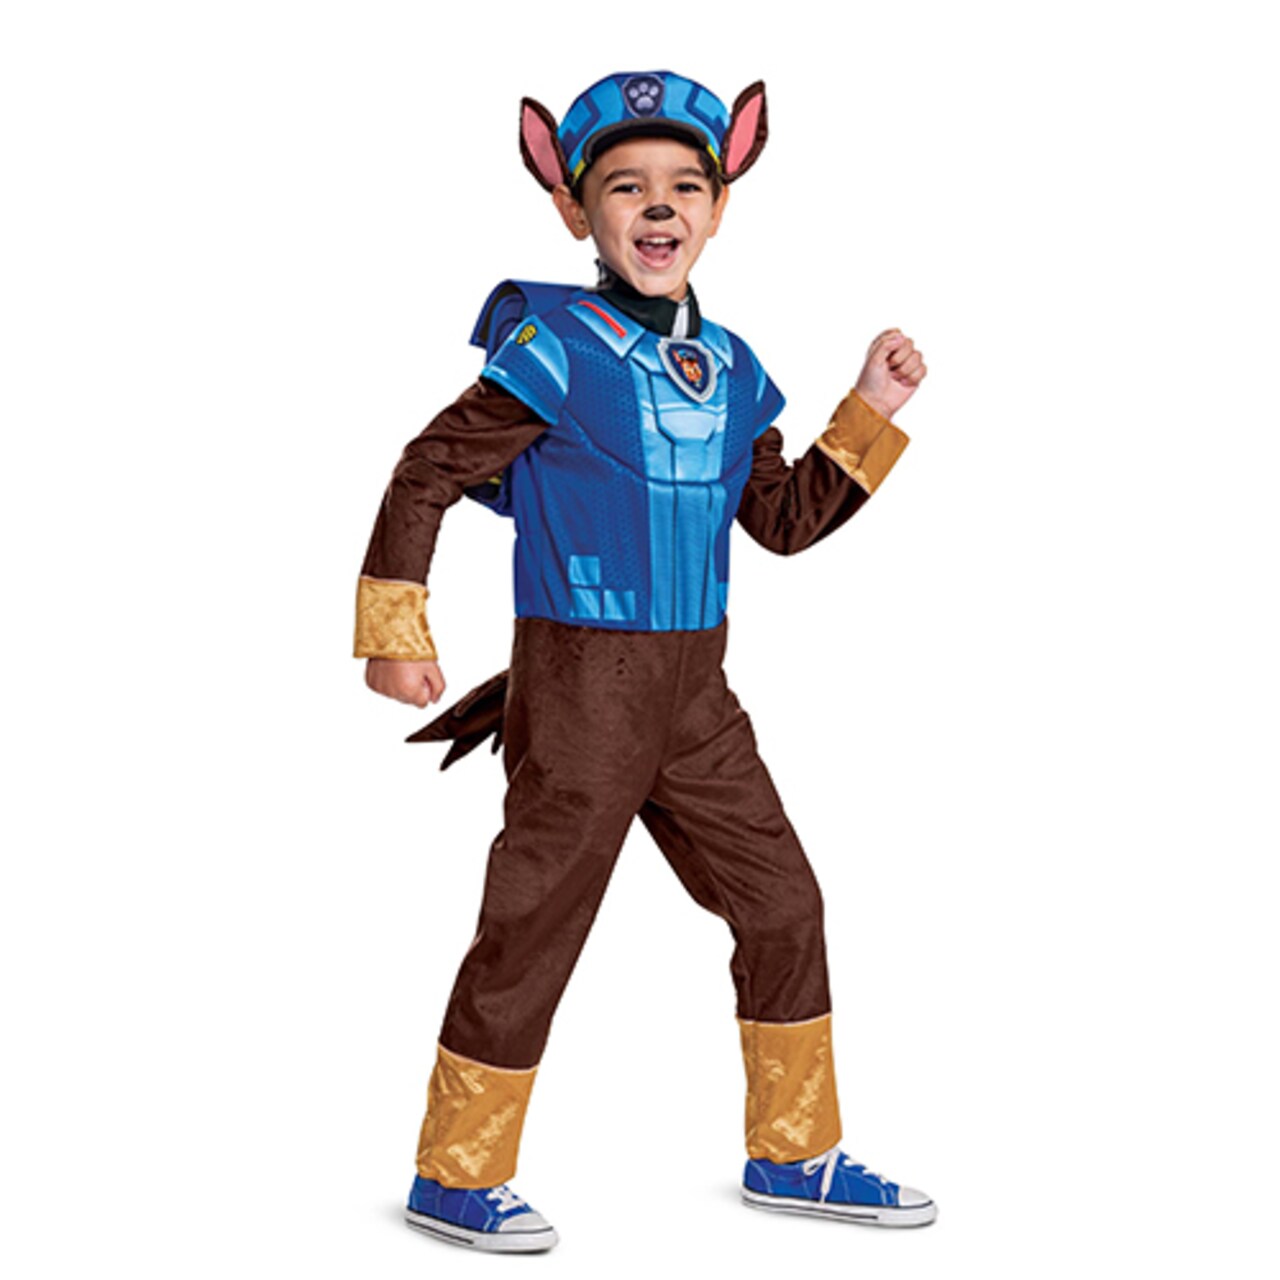 Paw Patrol Movie Chase Deluxe Fancy-Dress Costume - Toddlers 18-24 Months